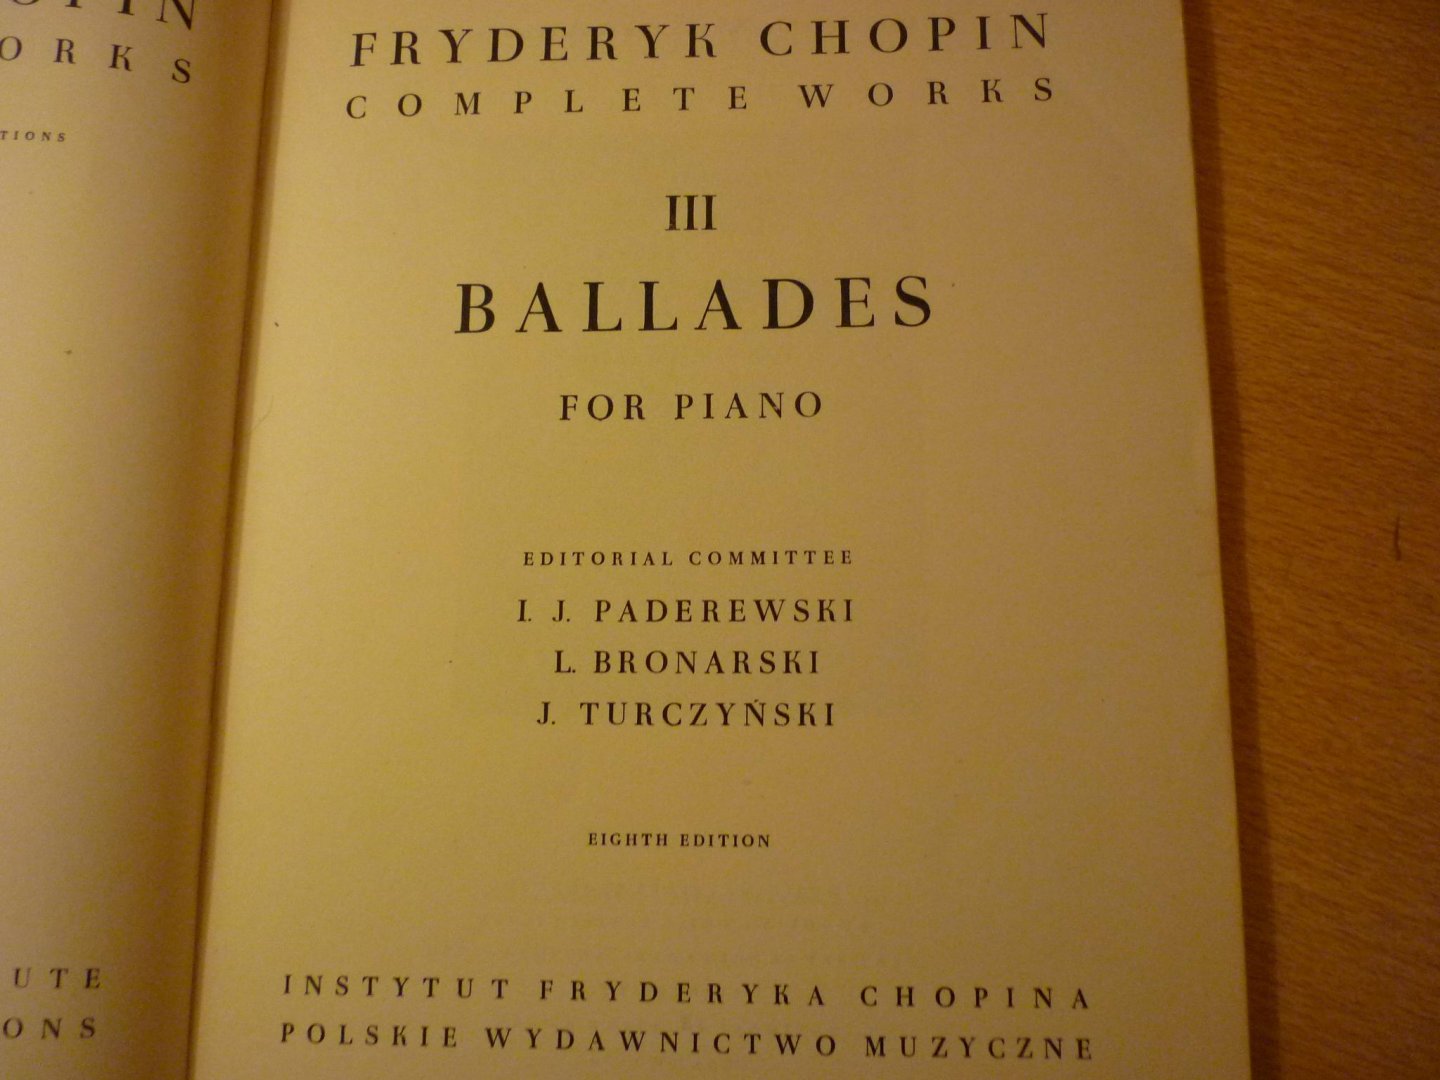 Chopin; Fr. (1810 - 1849) - Chopin - complete works III; Ballades for Piano